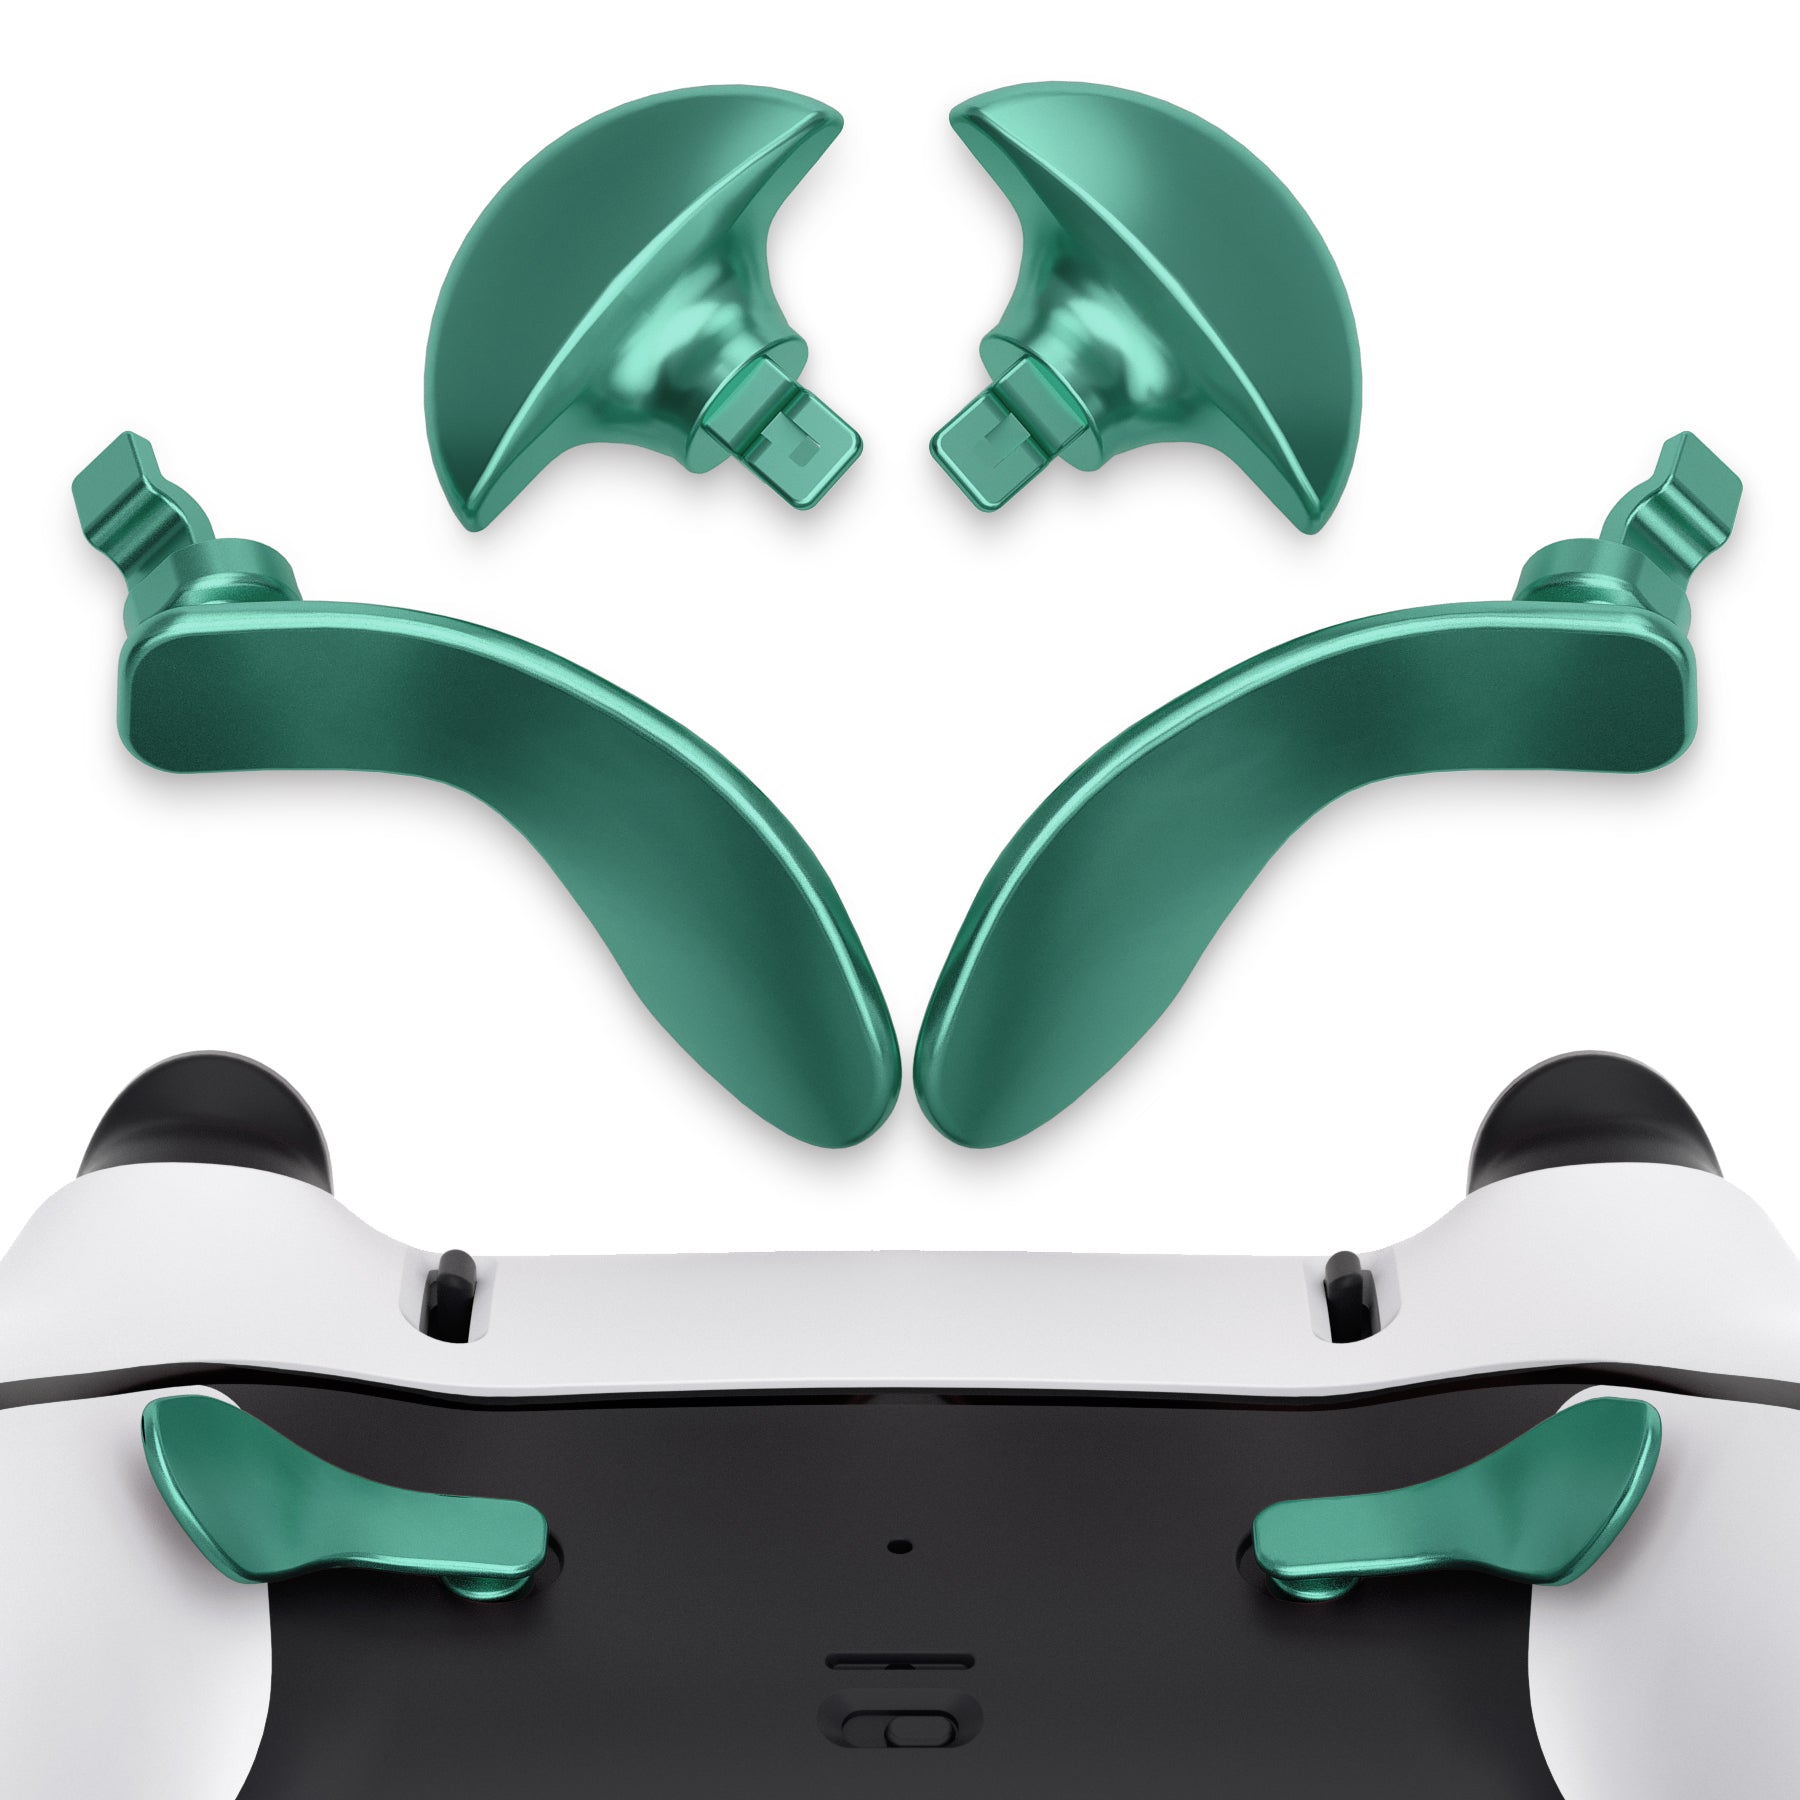 eXtremeRate Retail Back Paddles for PS5 Edge Controller, Metallic Aqua Green Replacement Interchangeable 4PCS Metal Back Buttons for PS5 Edge Controller - Controller NOT Included - BHPFP003